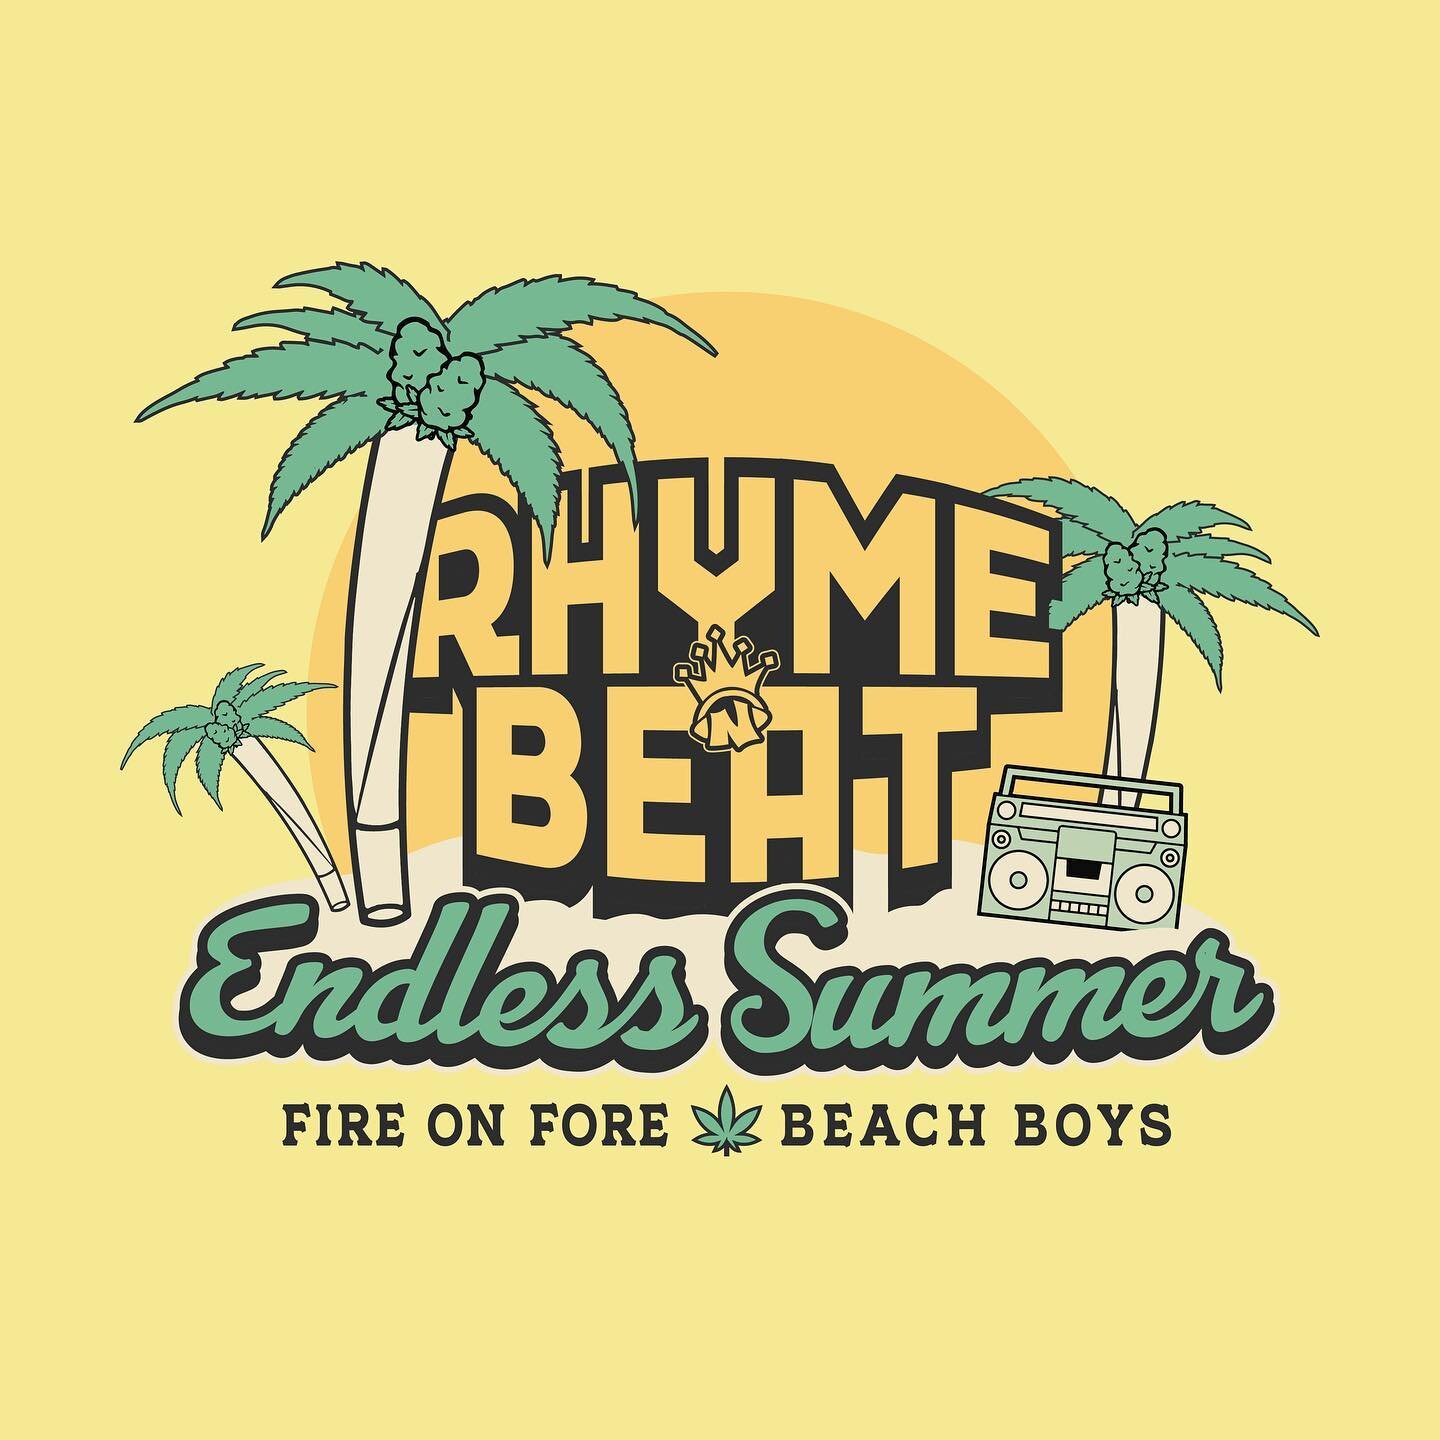 I recently worked on the design for this collab with @rhyme.beat @fireonforestreet &amp; @beachboys207 Available in tees and long sleeves at FOF &amp; BB stores. #endlesssummer #rhymebeat #cannabis #medicalmarijuana #newengland #noize #art #apparel #